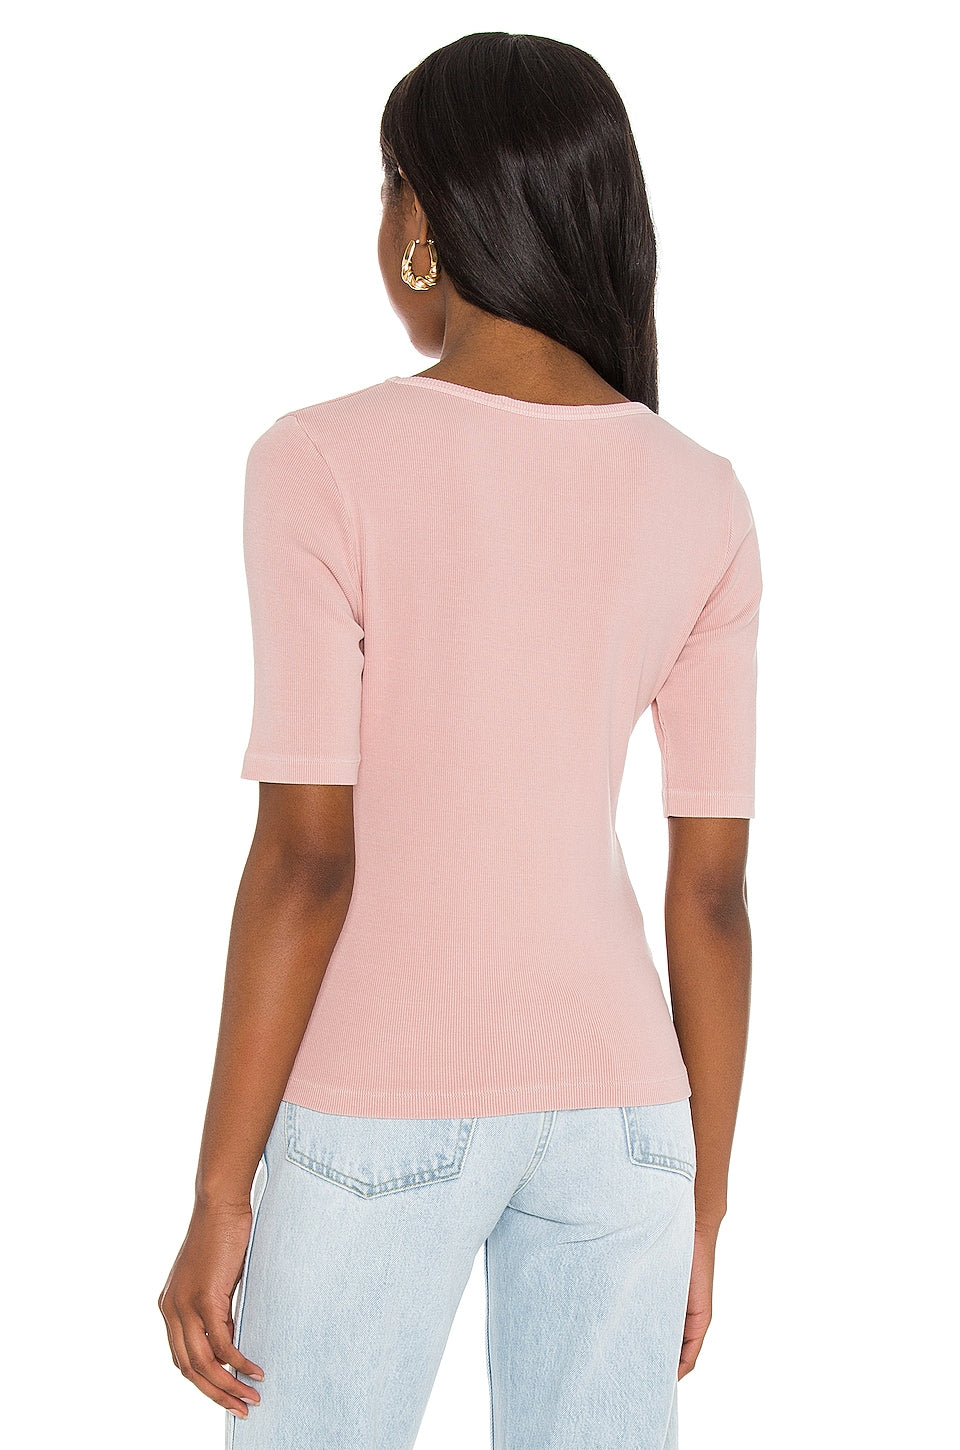 Green The Zoe Top in BLUSH PINK